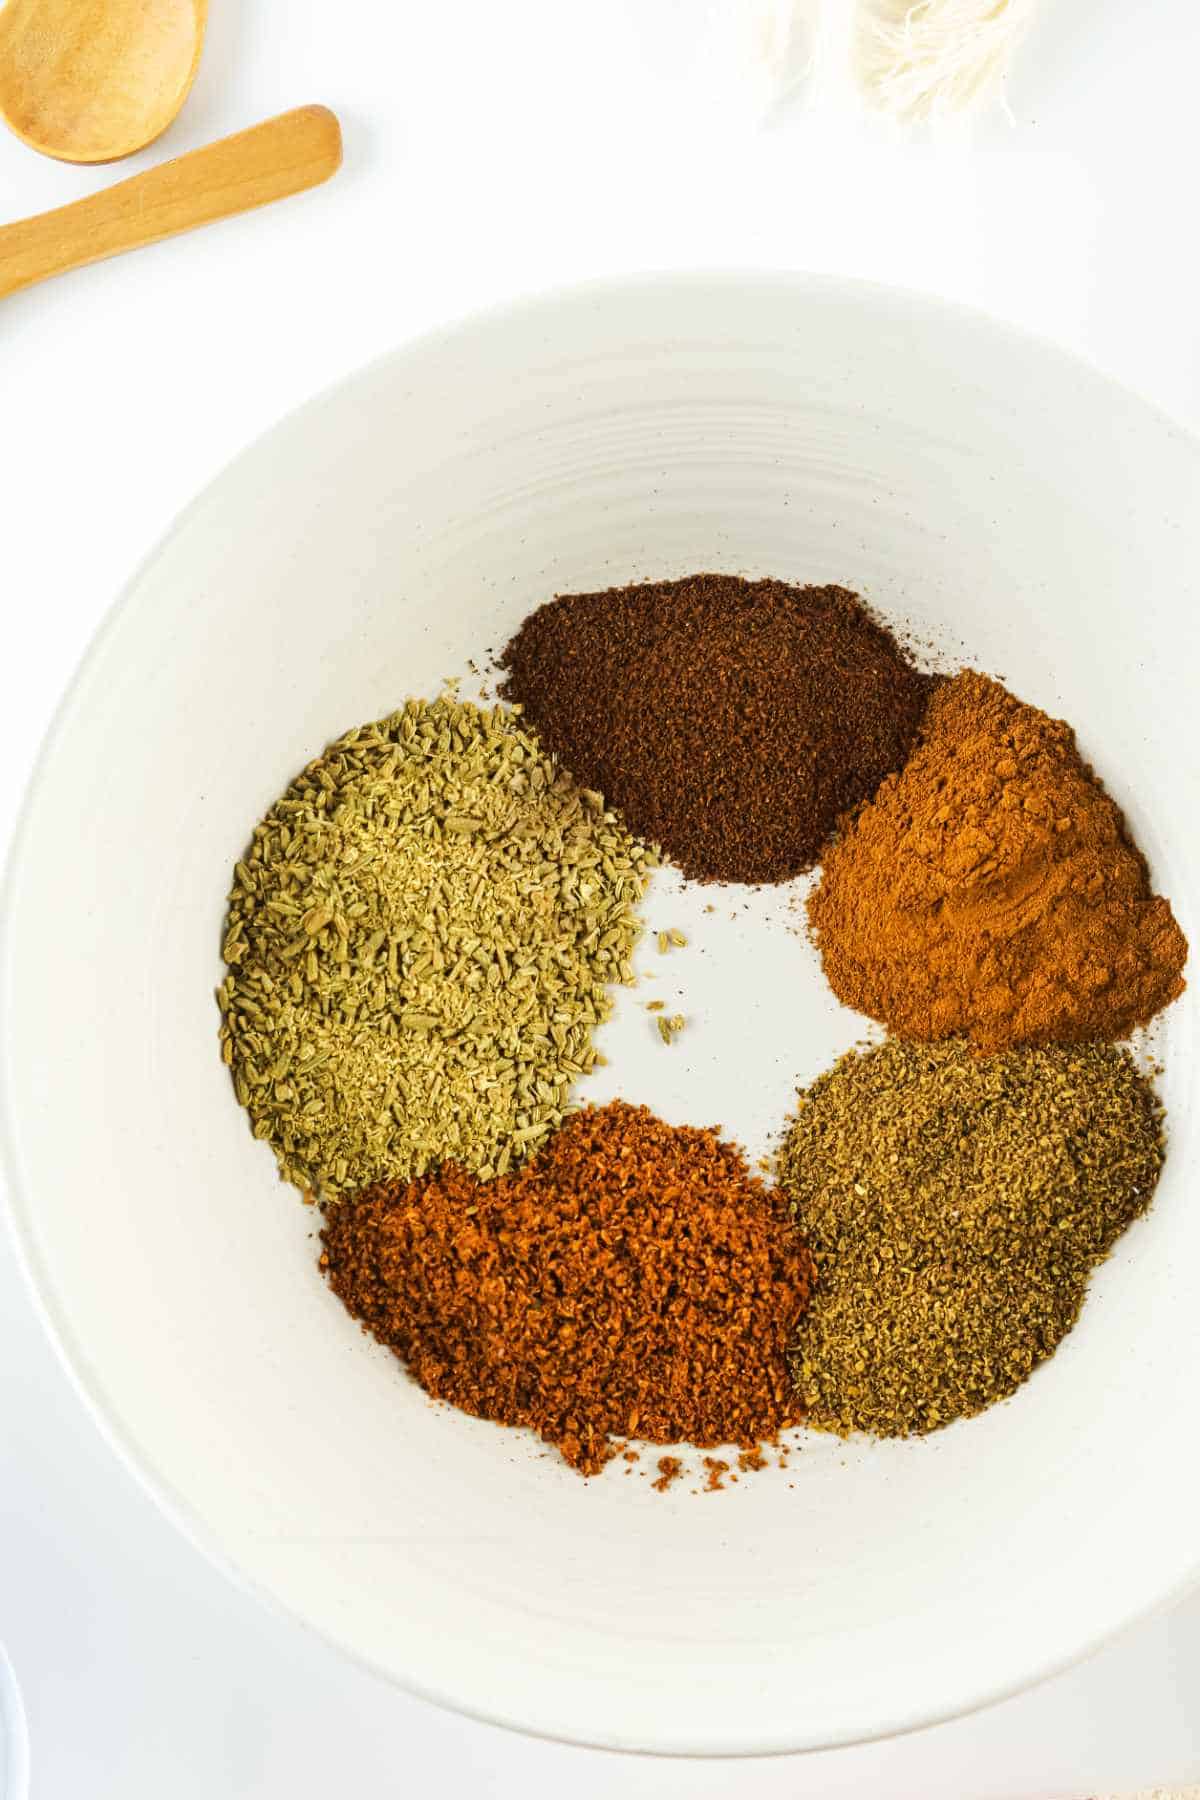 spices in a bowl for blending.